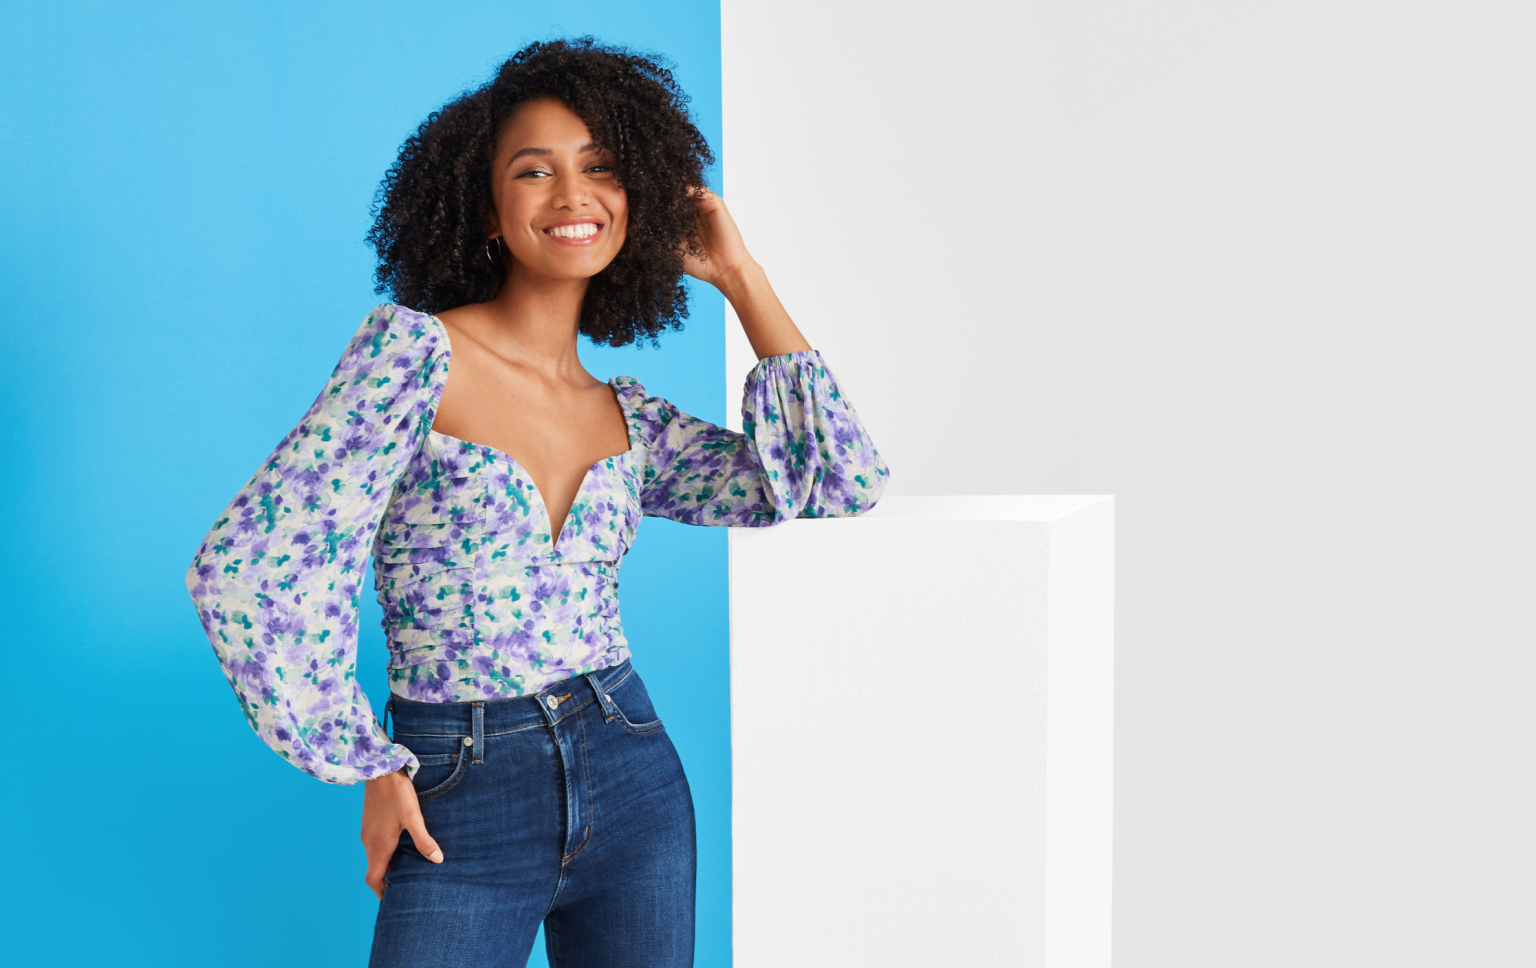 Woman in a floral blouse and jeans posing with one hand in her hair